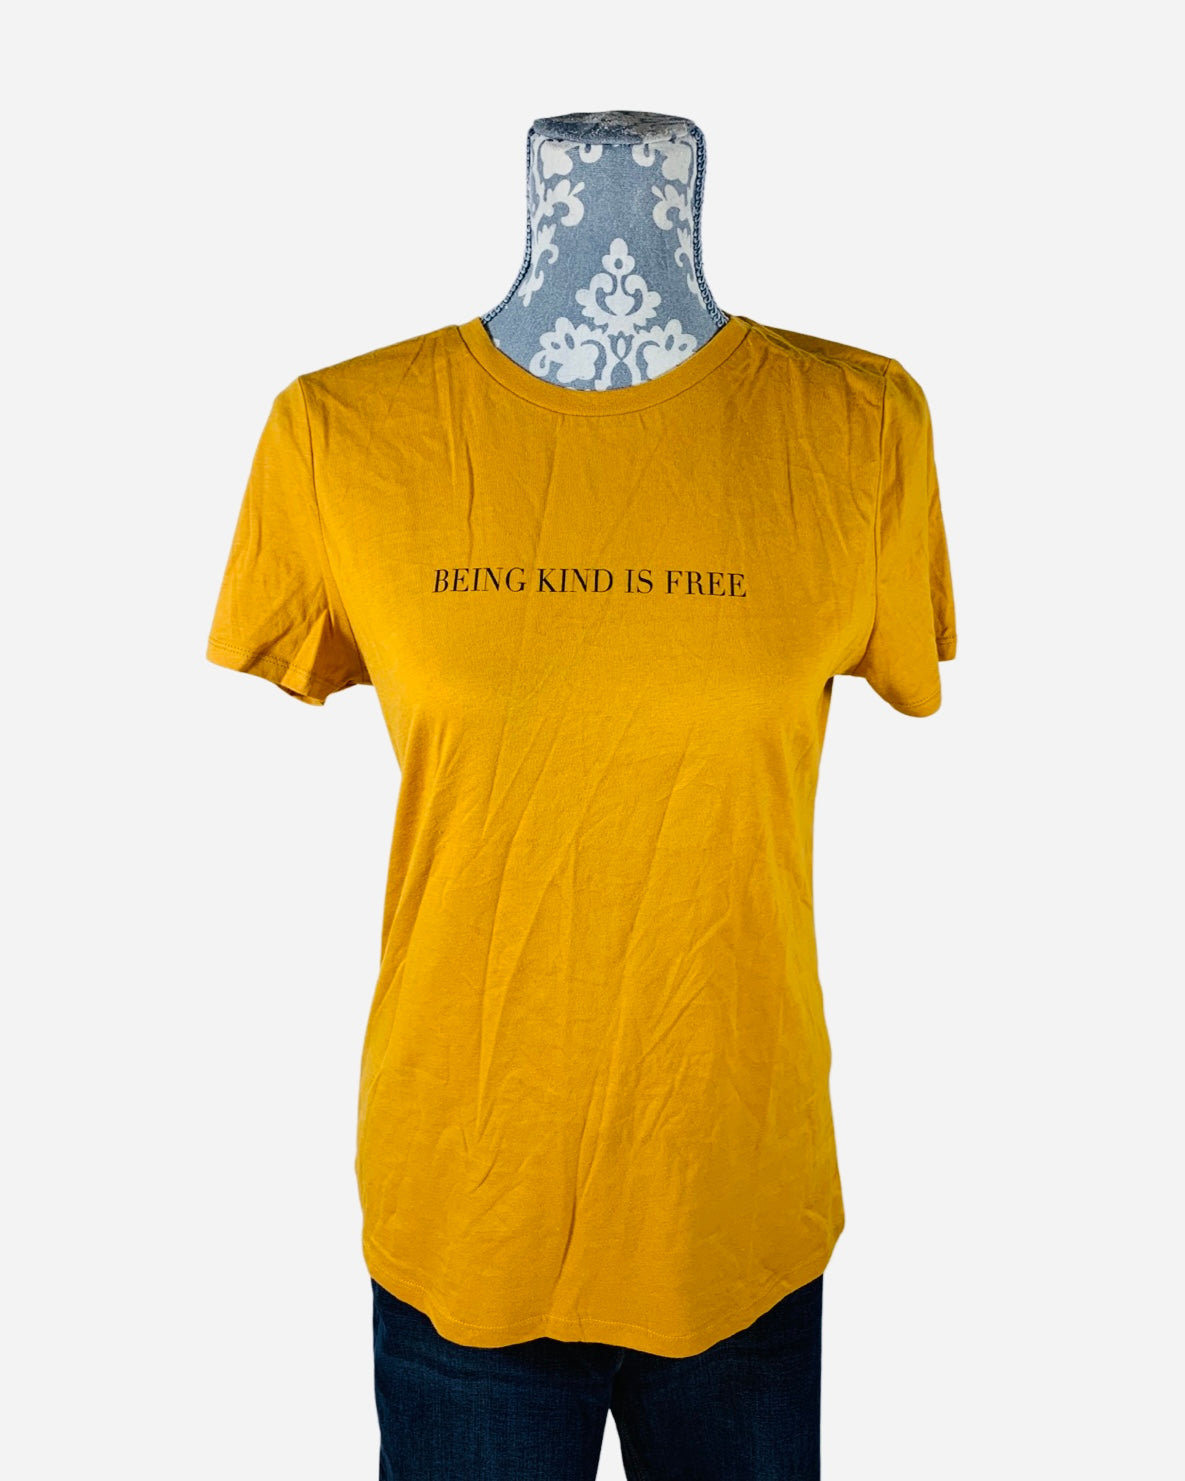 New Look 'Being Kind is Free' T Shirt Size 10